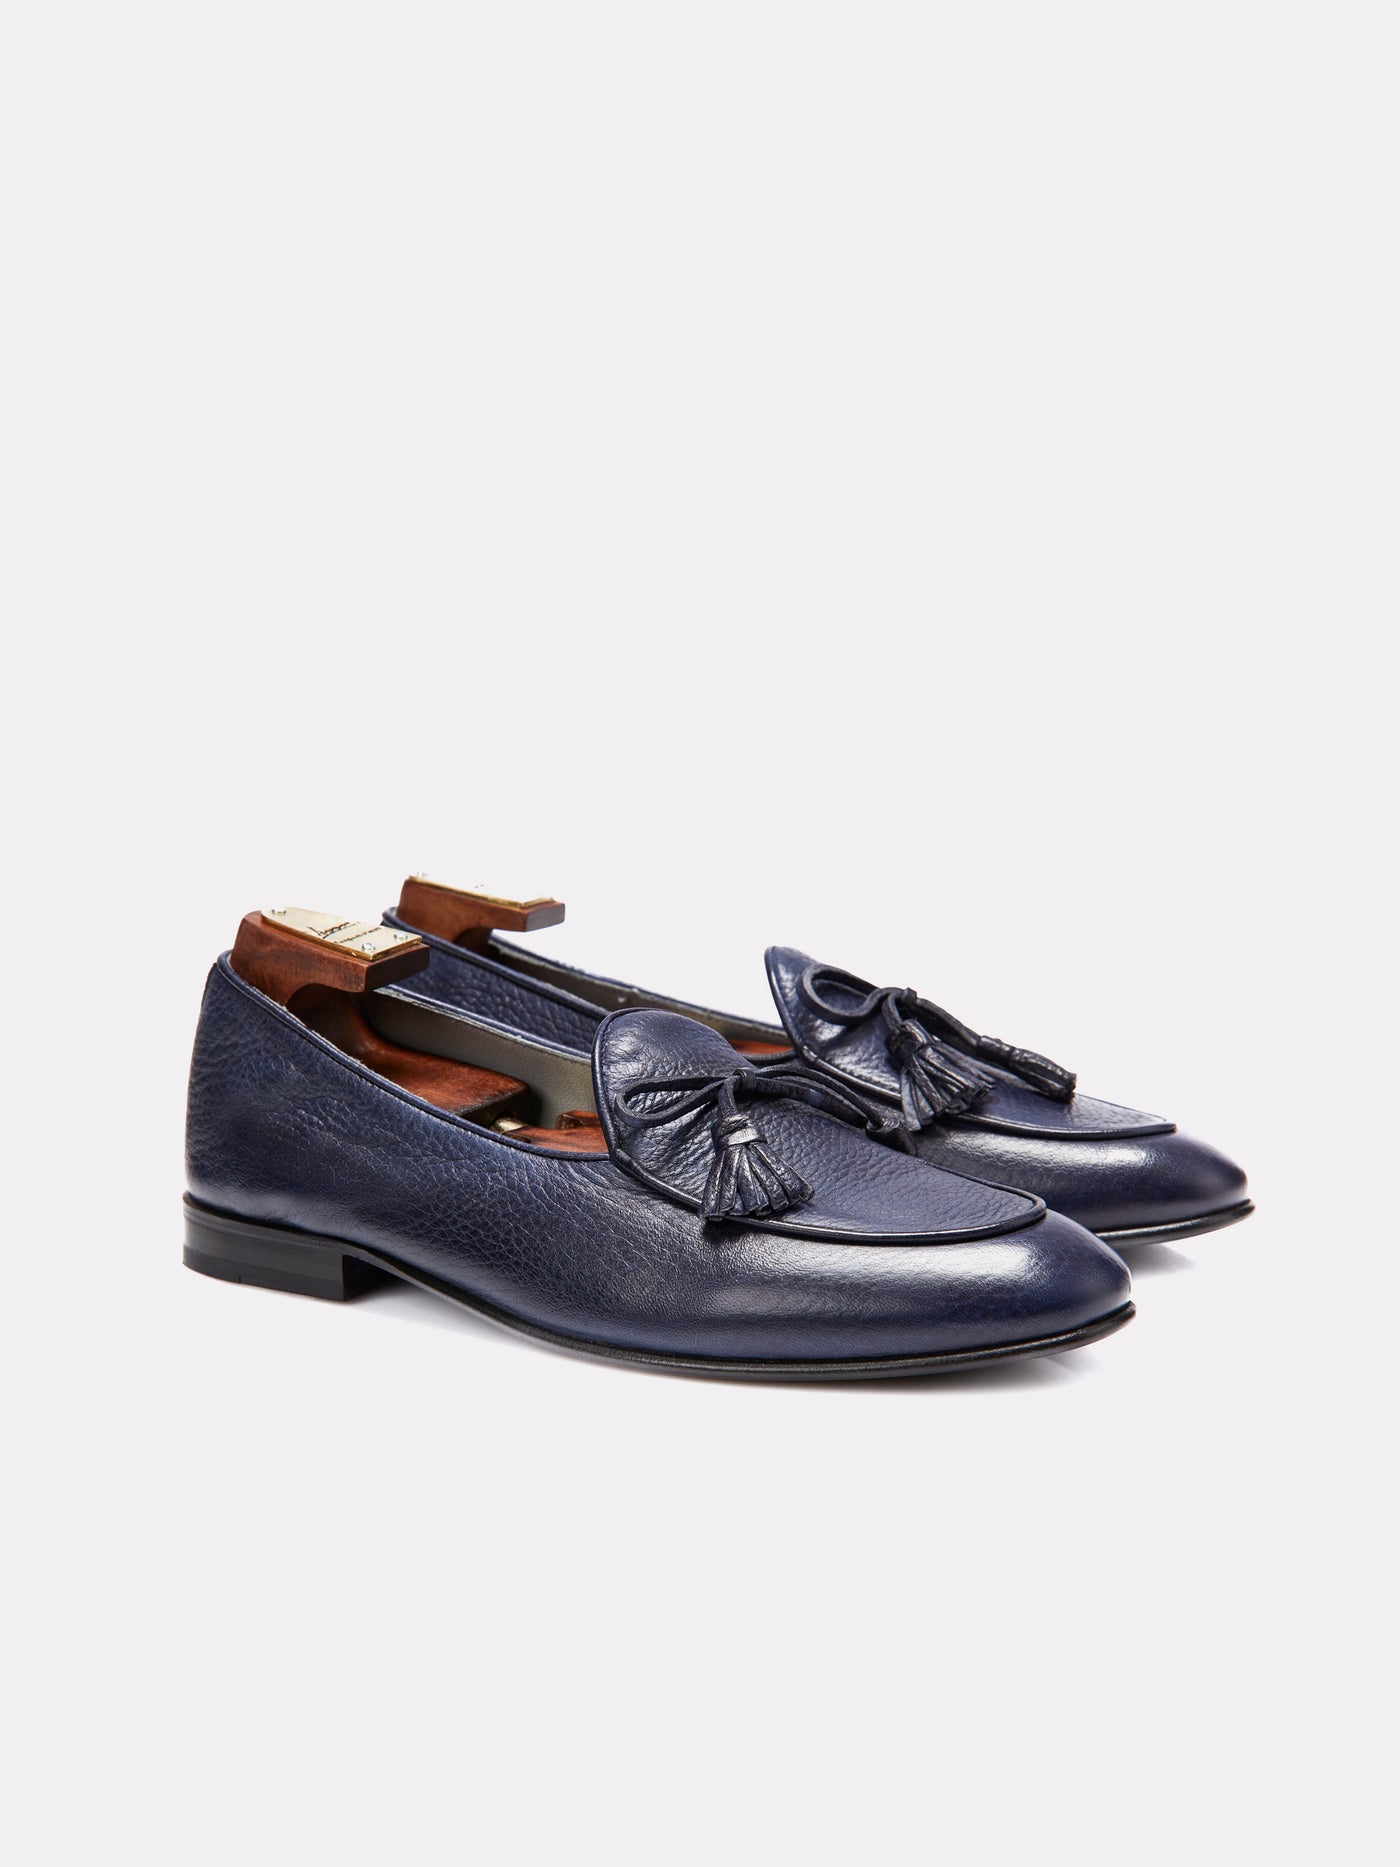 Loafer shoes with tassels, navy